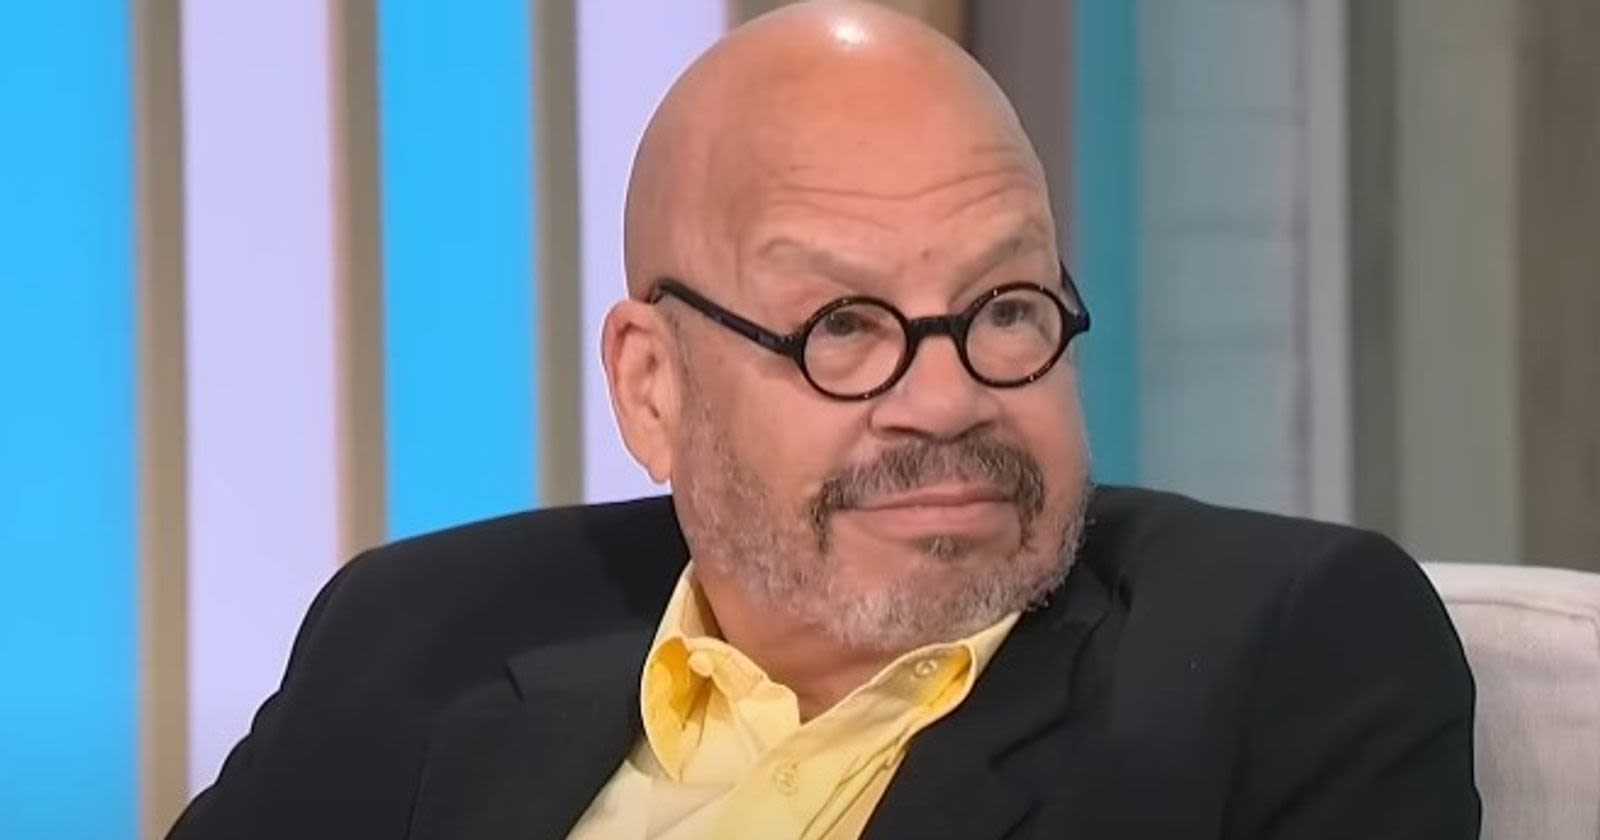 Why Is Tom Joyner in A Wheelchair? Cruise Host's Health Condition Explored